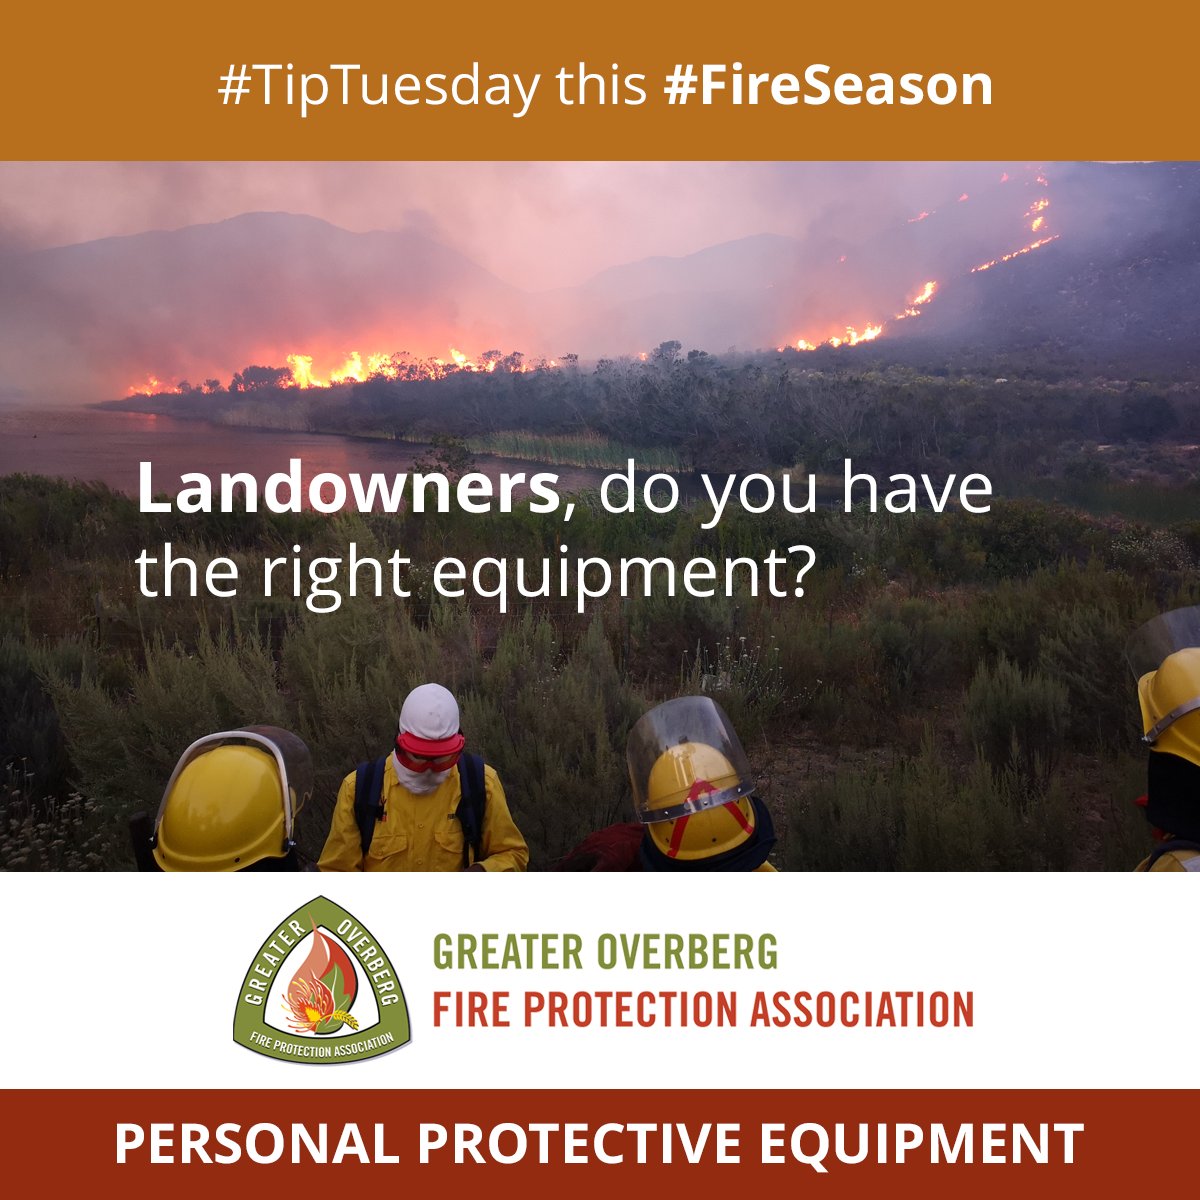 Landowners, all farm team members should have their personal protective equipment ready, including: ✔ Leather boots ✔ Leather gloves ✔ Overall, safety wear or jeans (100% cotton) ✔ Bottle of drinking water ✔ Torch at night More here: overbergfpa.co.za/the-right-equi…